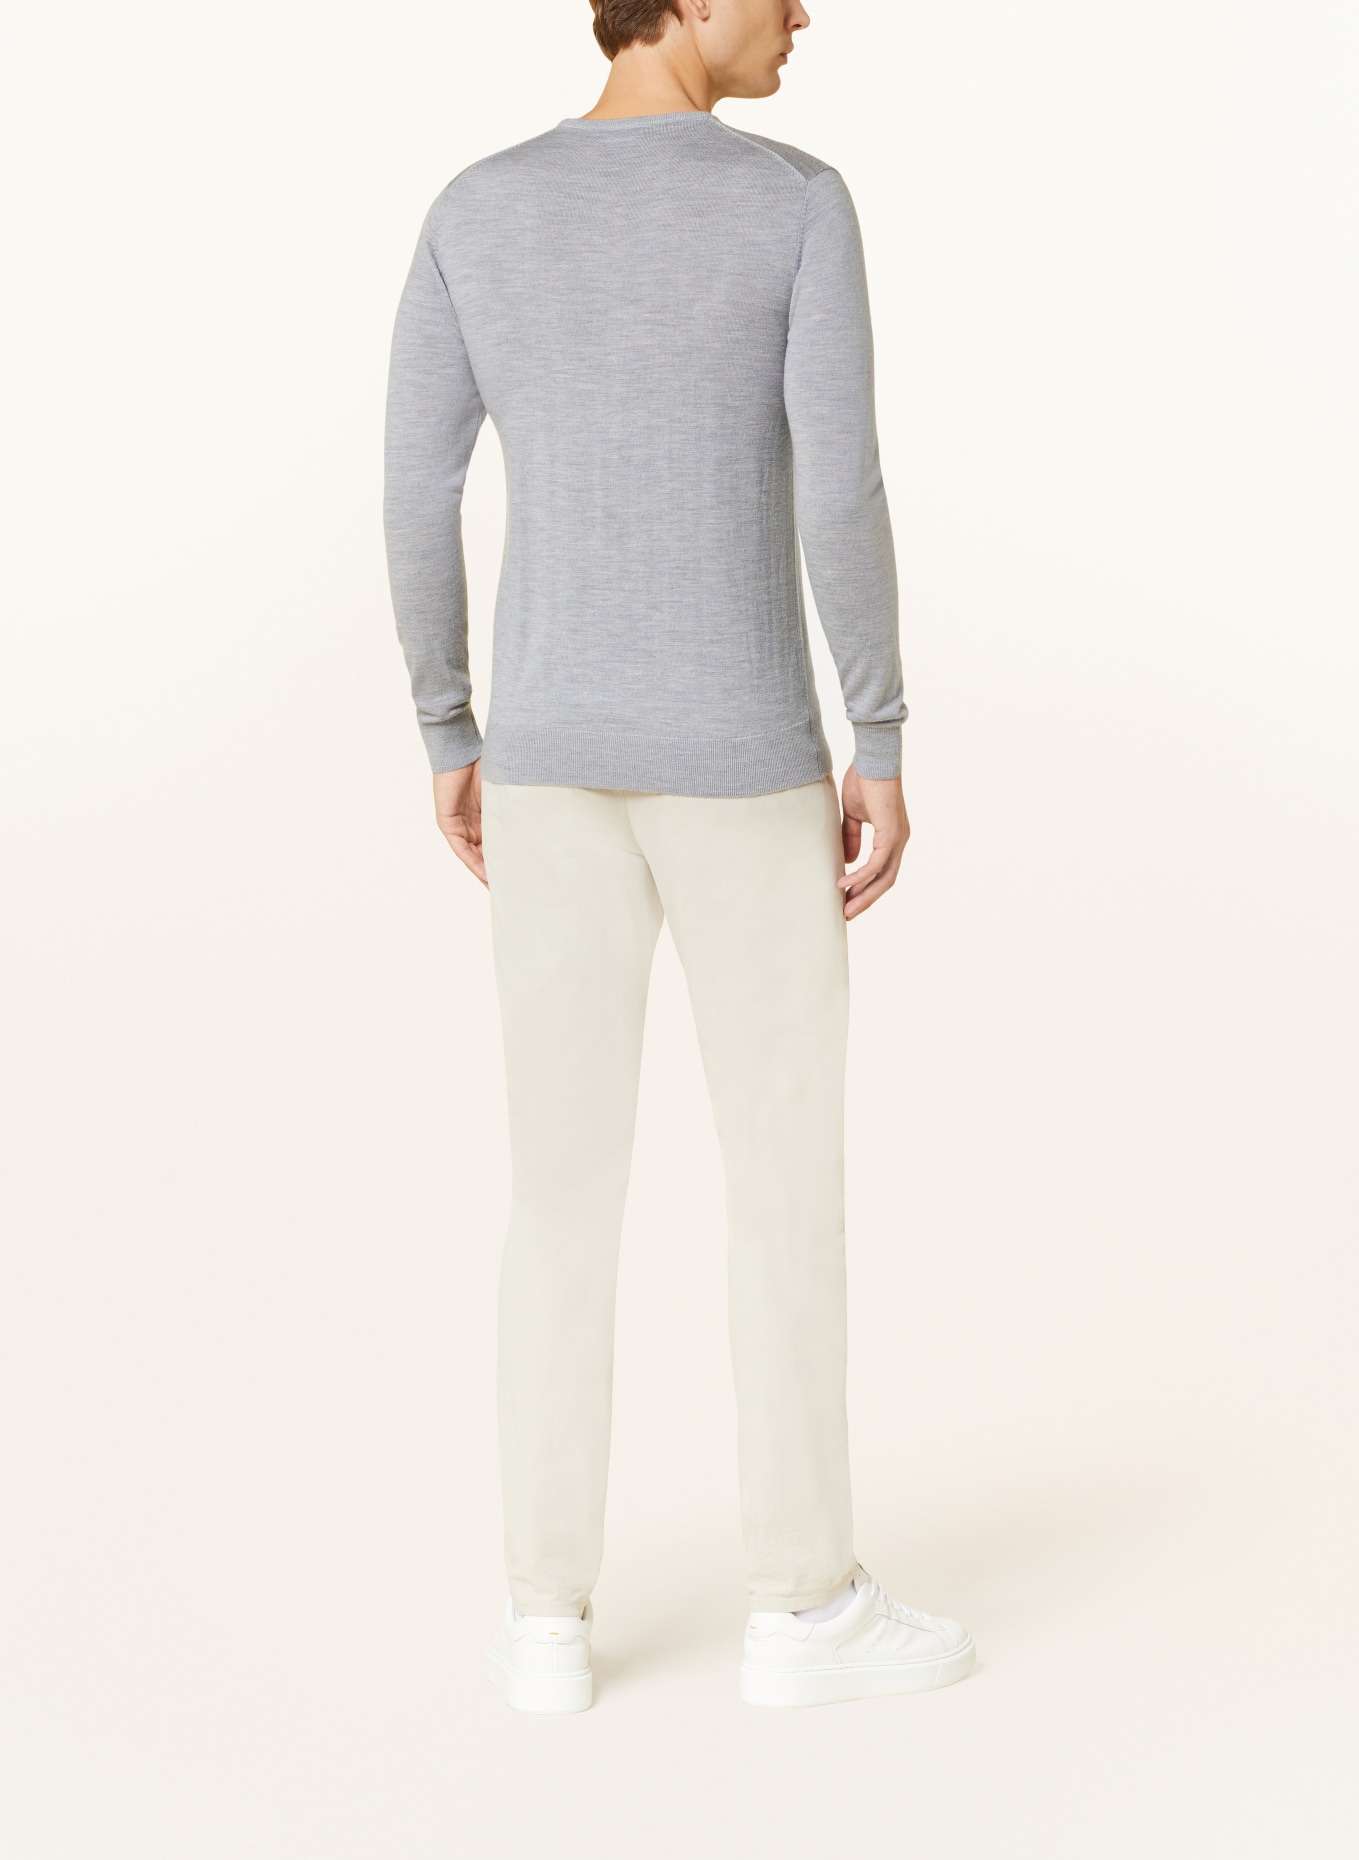 PROFUOMO Sweater made of merino wool, Color: GRAY (Image 3)